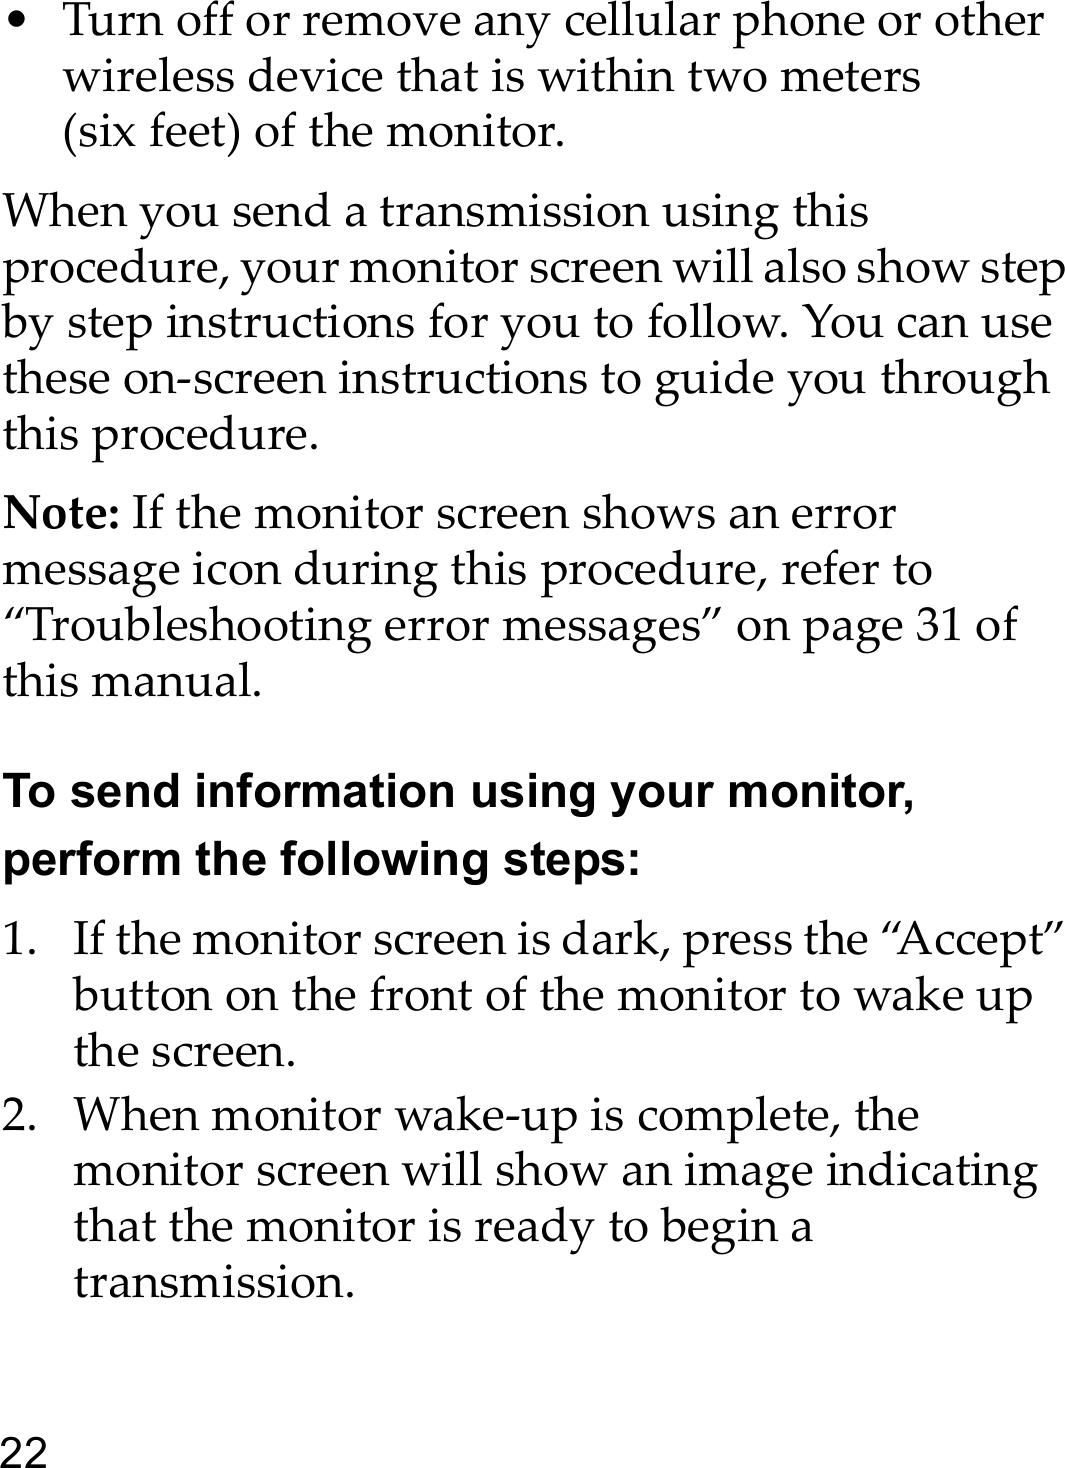 22• Turn off or remove any cellular phone or other wireless device that is within two meters (six feet) of the monitor.When you send a transmission using this procedure, your monitor screen will also show step by step instructions for you to follow. You can use these on-screen instructions to guide you through this procedure.Note: If the monitor screen shows an error message icon during this procedure, refer to “Troubleshooting error messages” on page 31 of this manual.To send information using your monitor, perform the following steps:1. If the monitor screen is dark, press the “Accept” button on the front of the monitor to wake up the screen.2. When monitor wake-up is complete, the monitor screen will show an image indicating that the monitor is ready to begin a transmission.